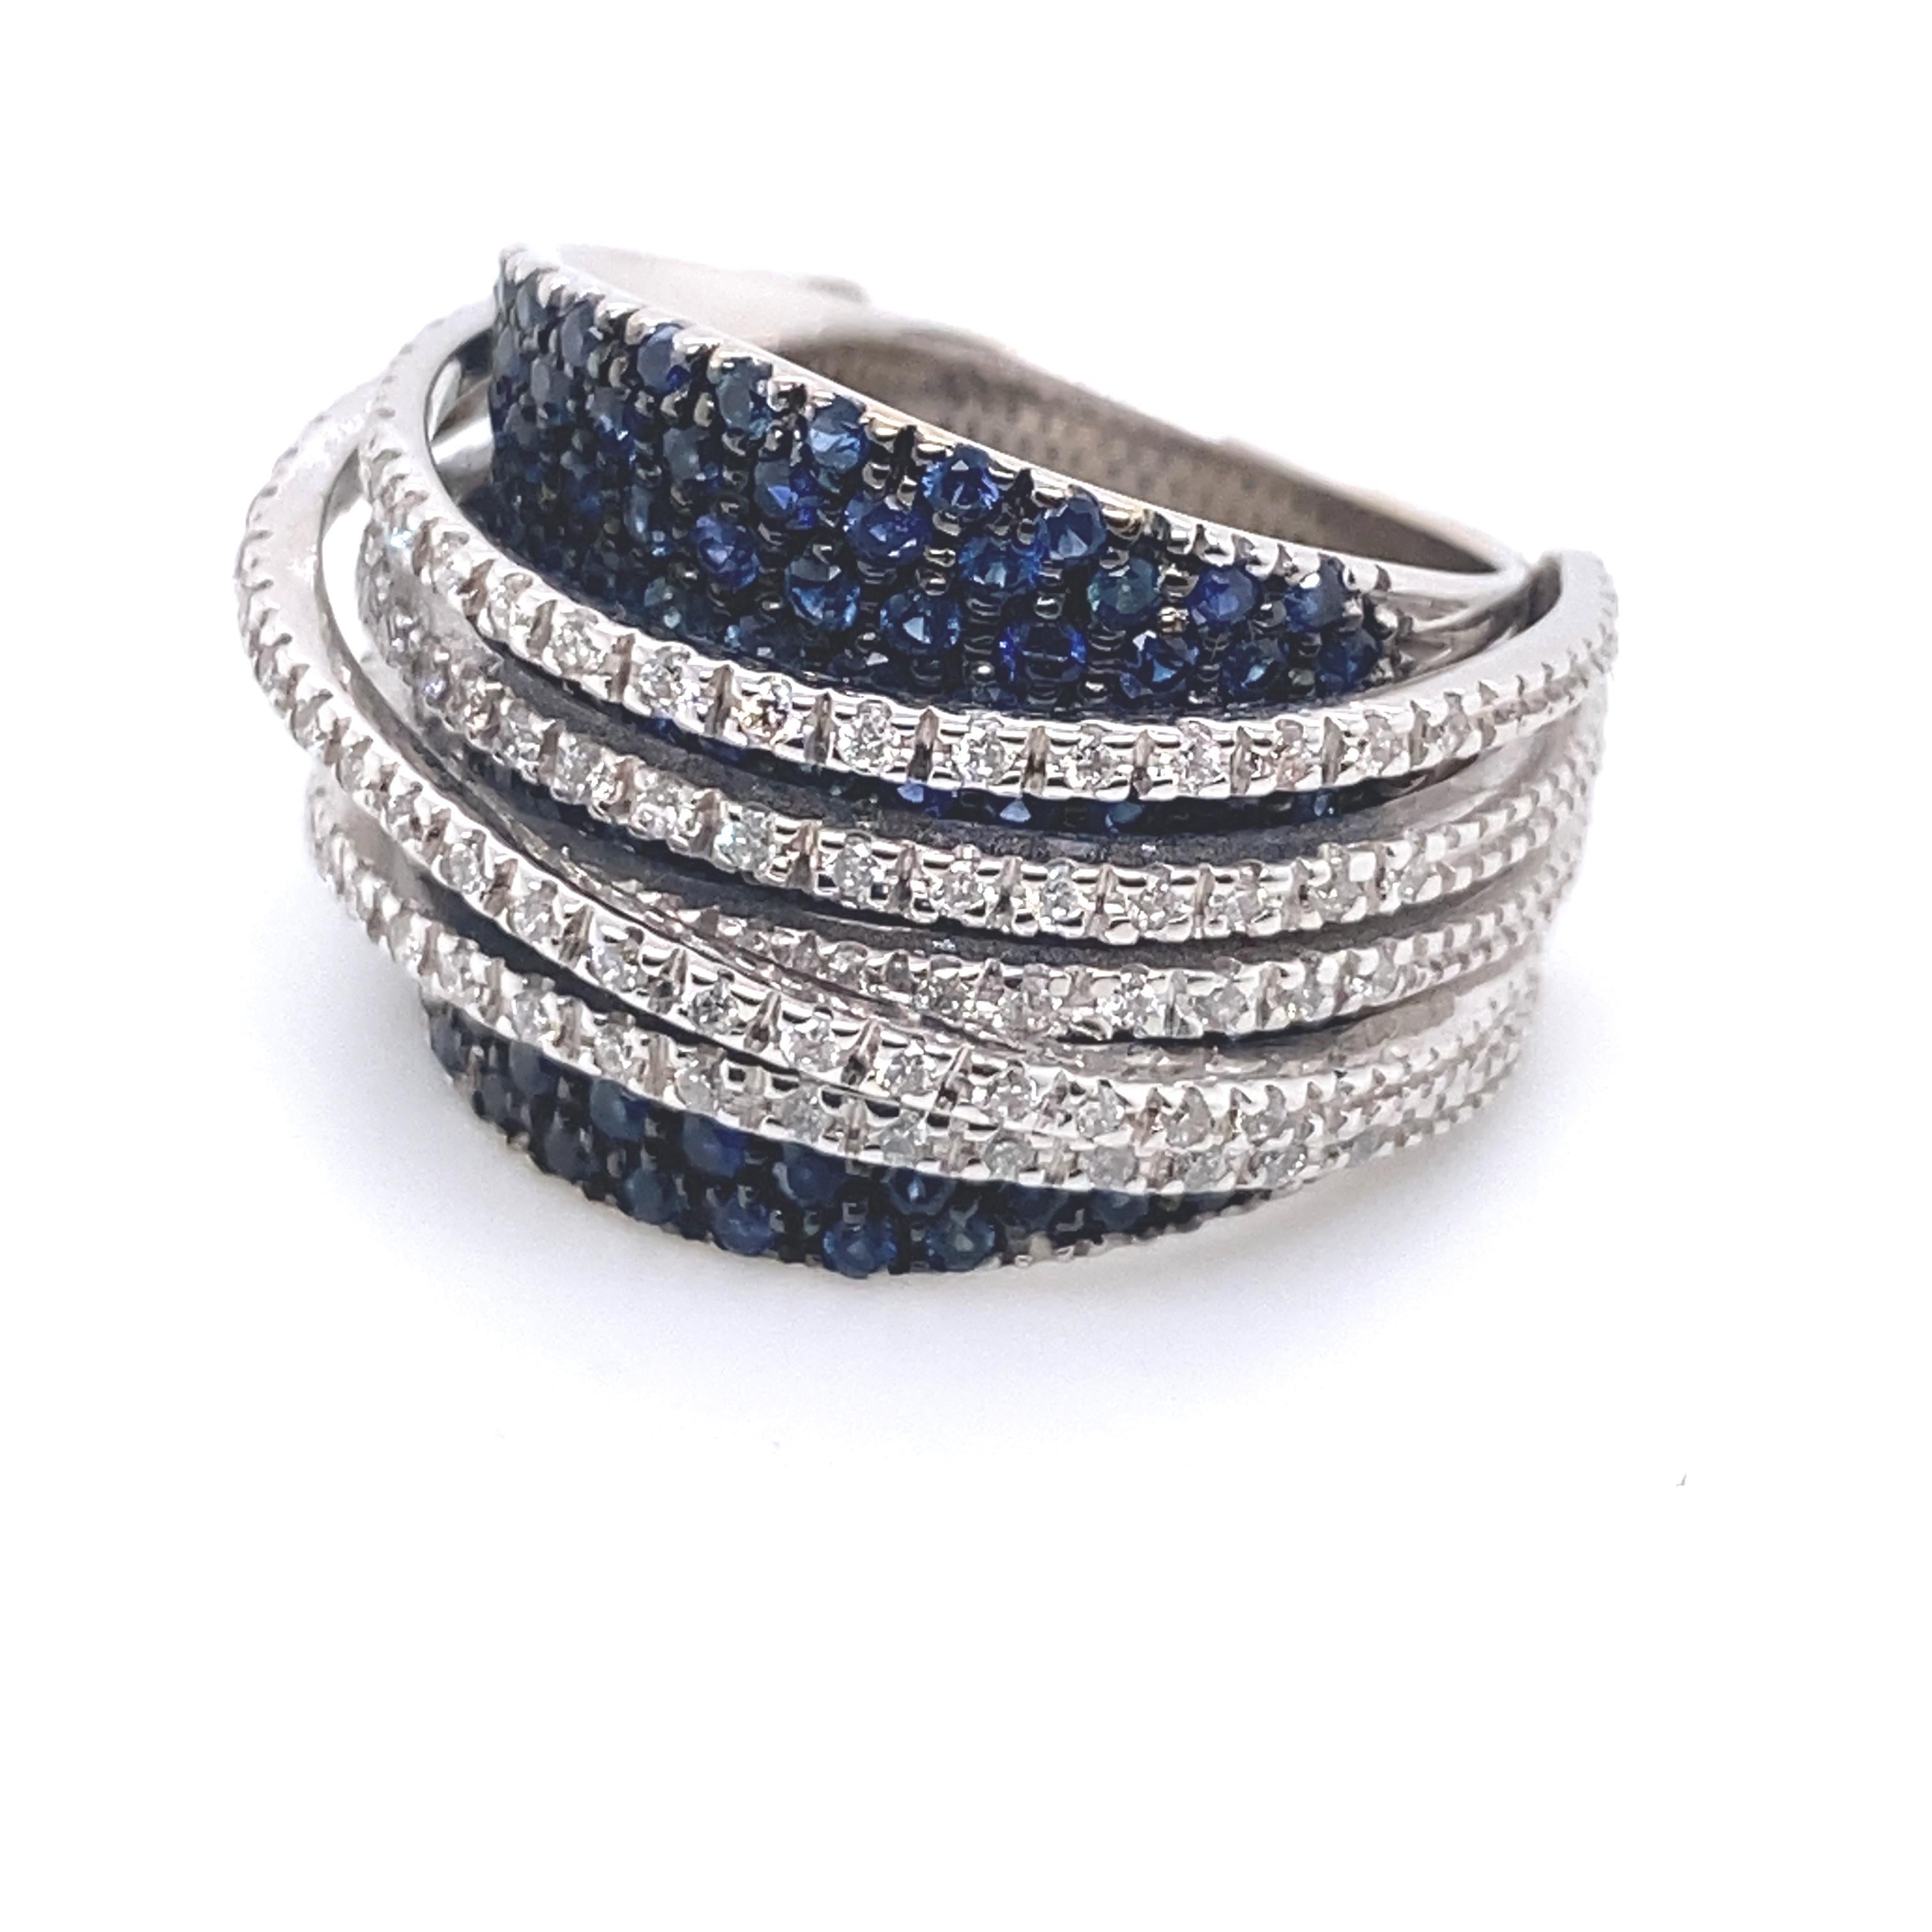 Contemporary 21st Century 18 Karat White Gold, G VS Diamond and Blue Sapphire Cocktail Ring For Sale